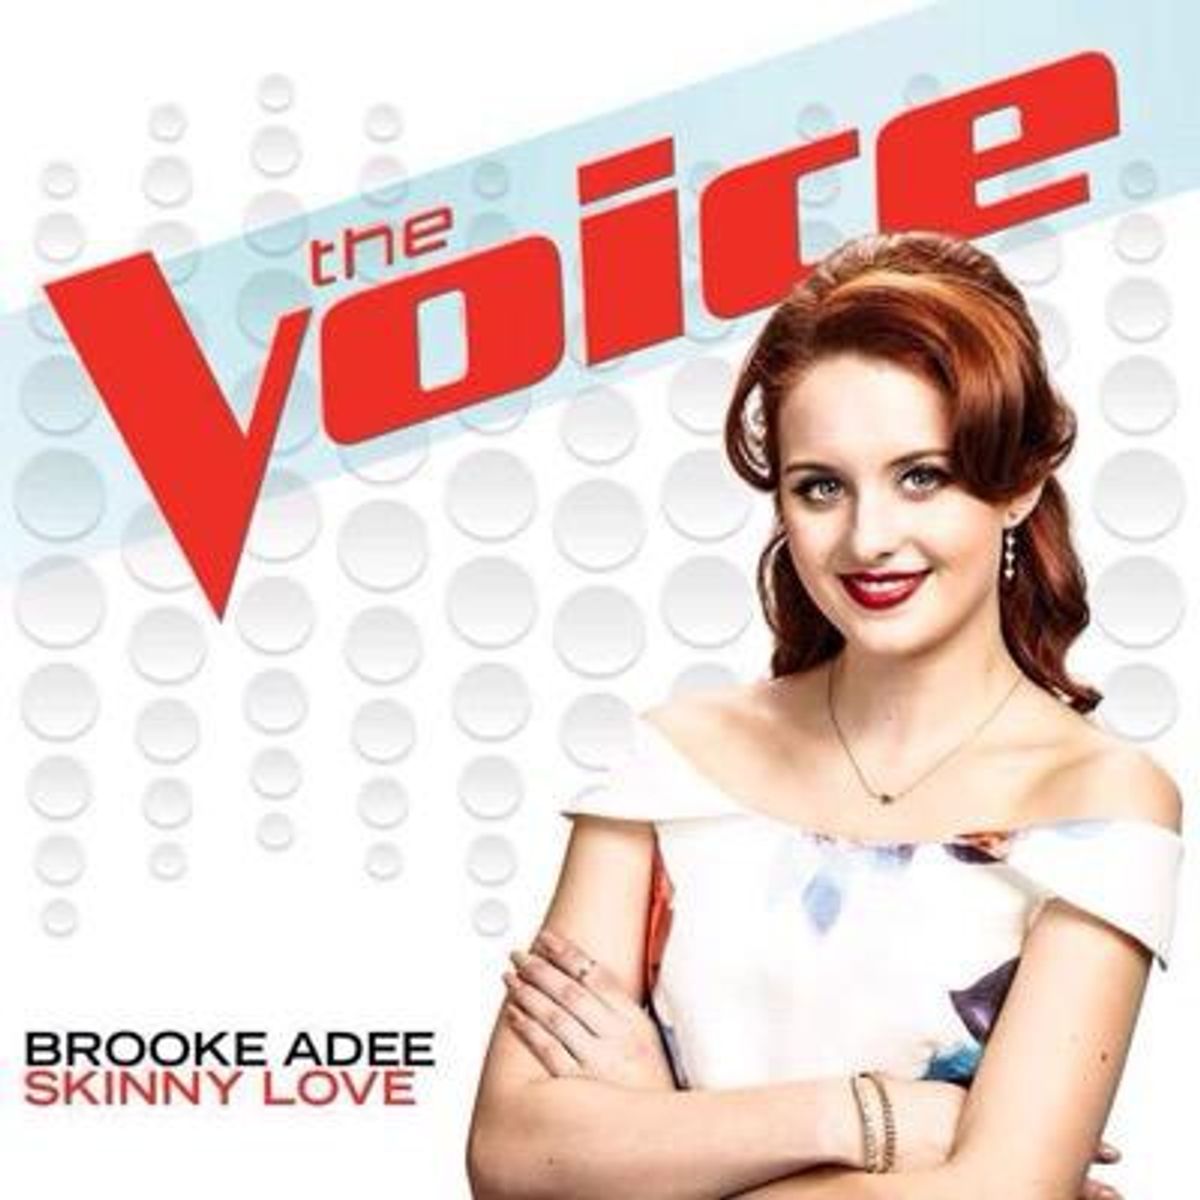 Q&A With "The Voice" Season 8 Contestant, Brooke Adee